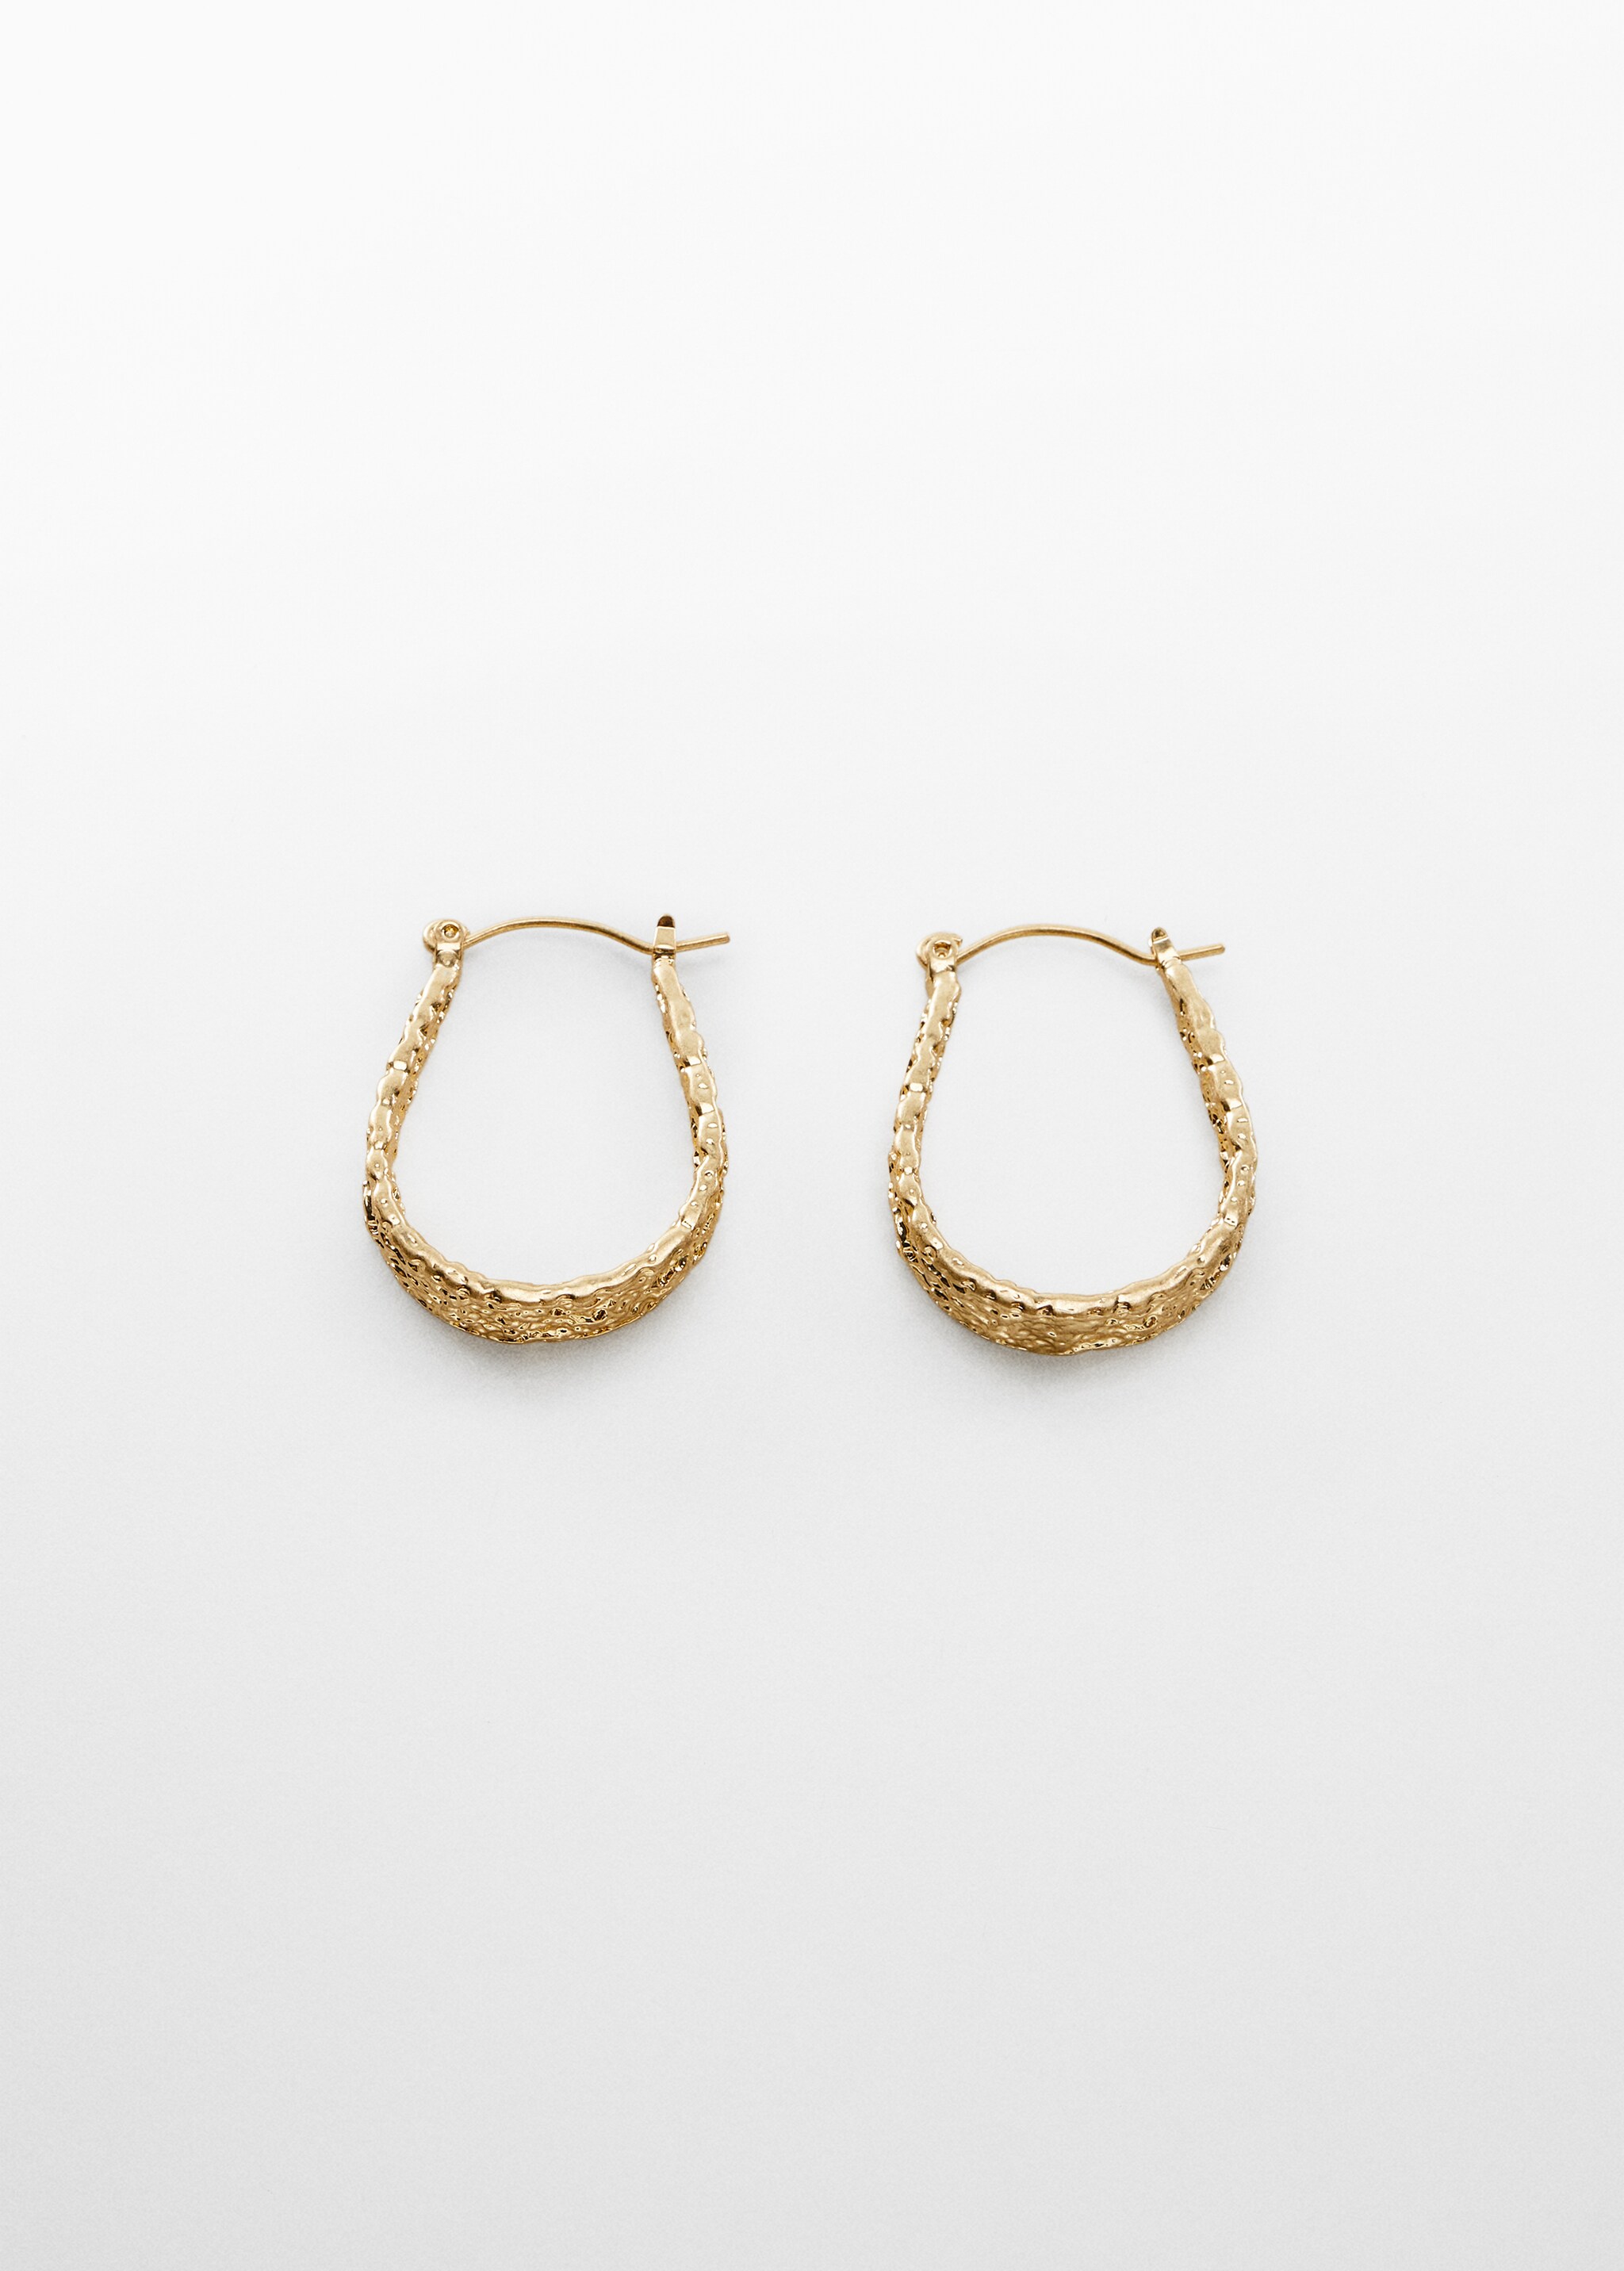 Textured earrings - Article without model